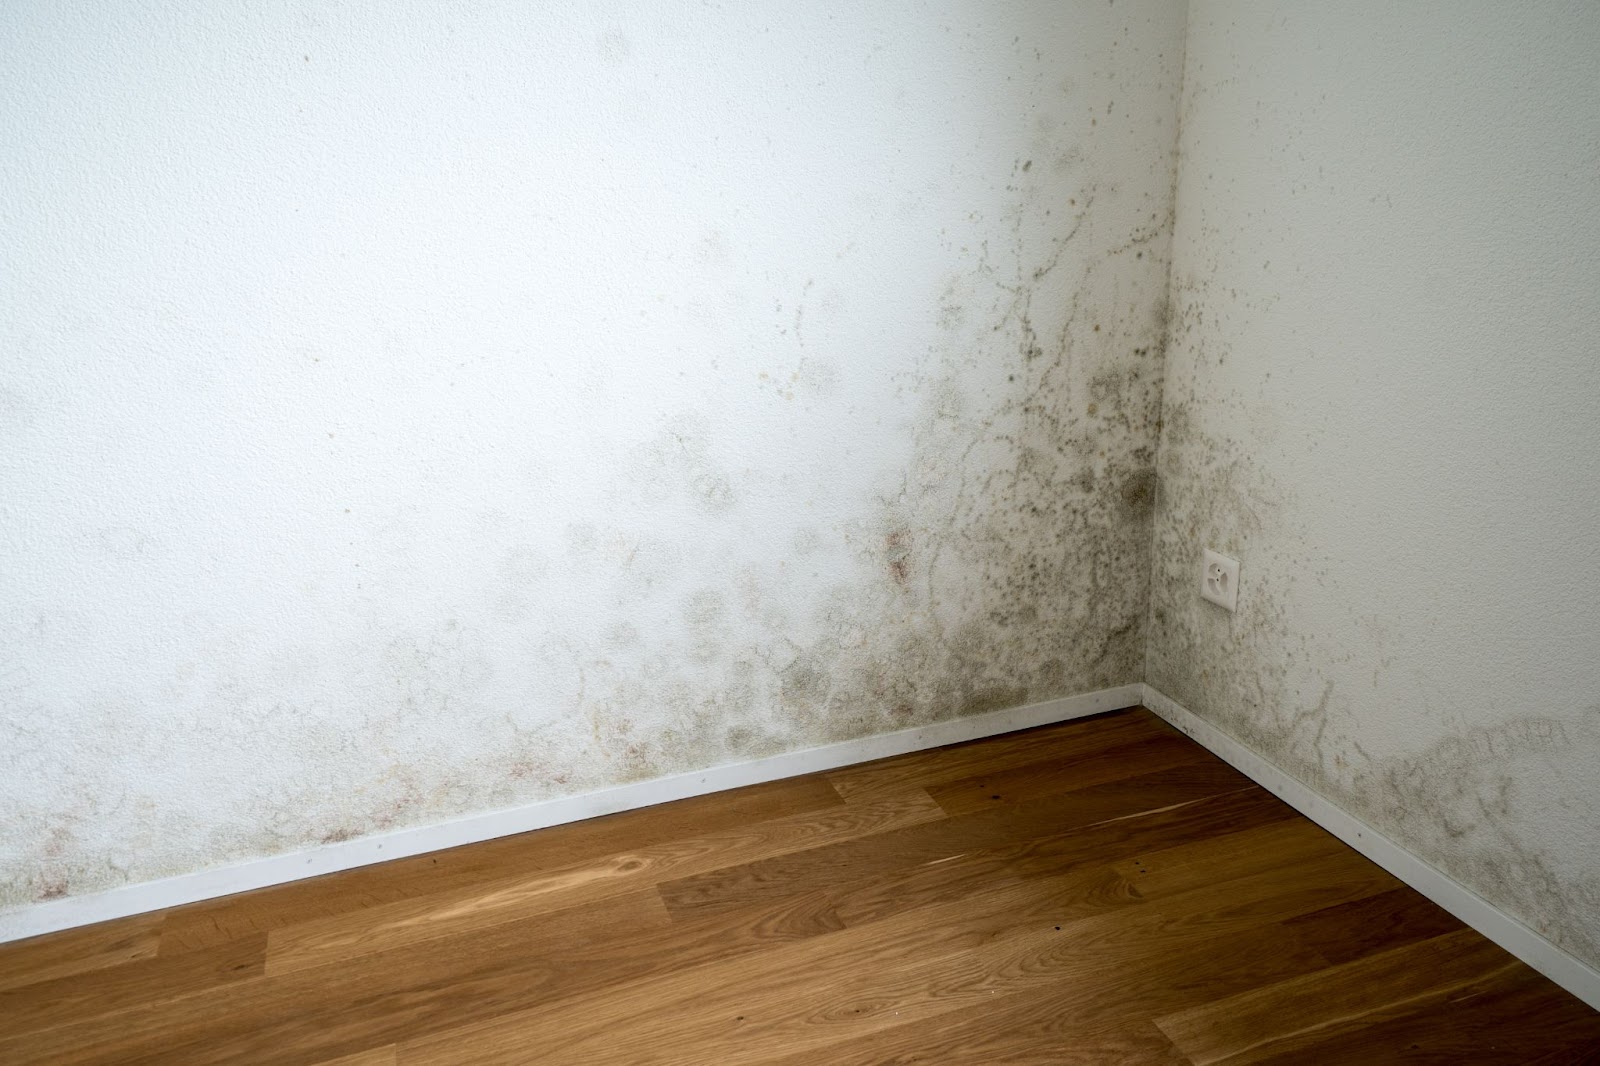 Moldy wall in room with wood floor, indicating water damage and the need for restoration